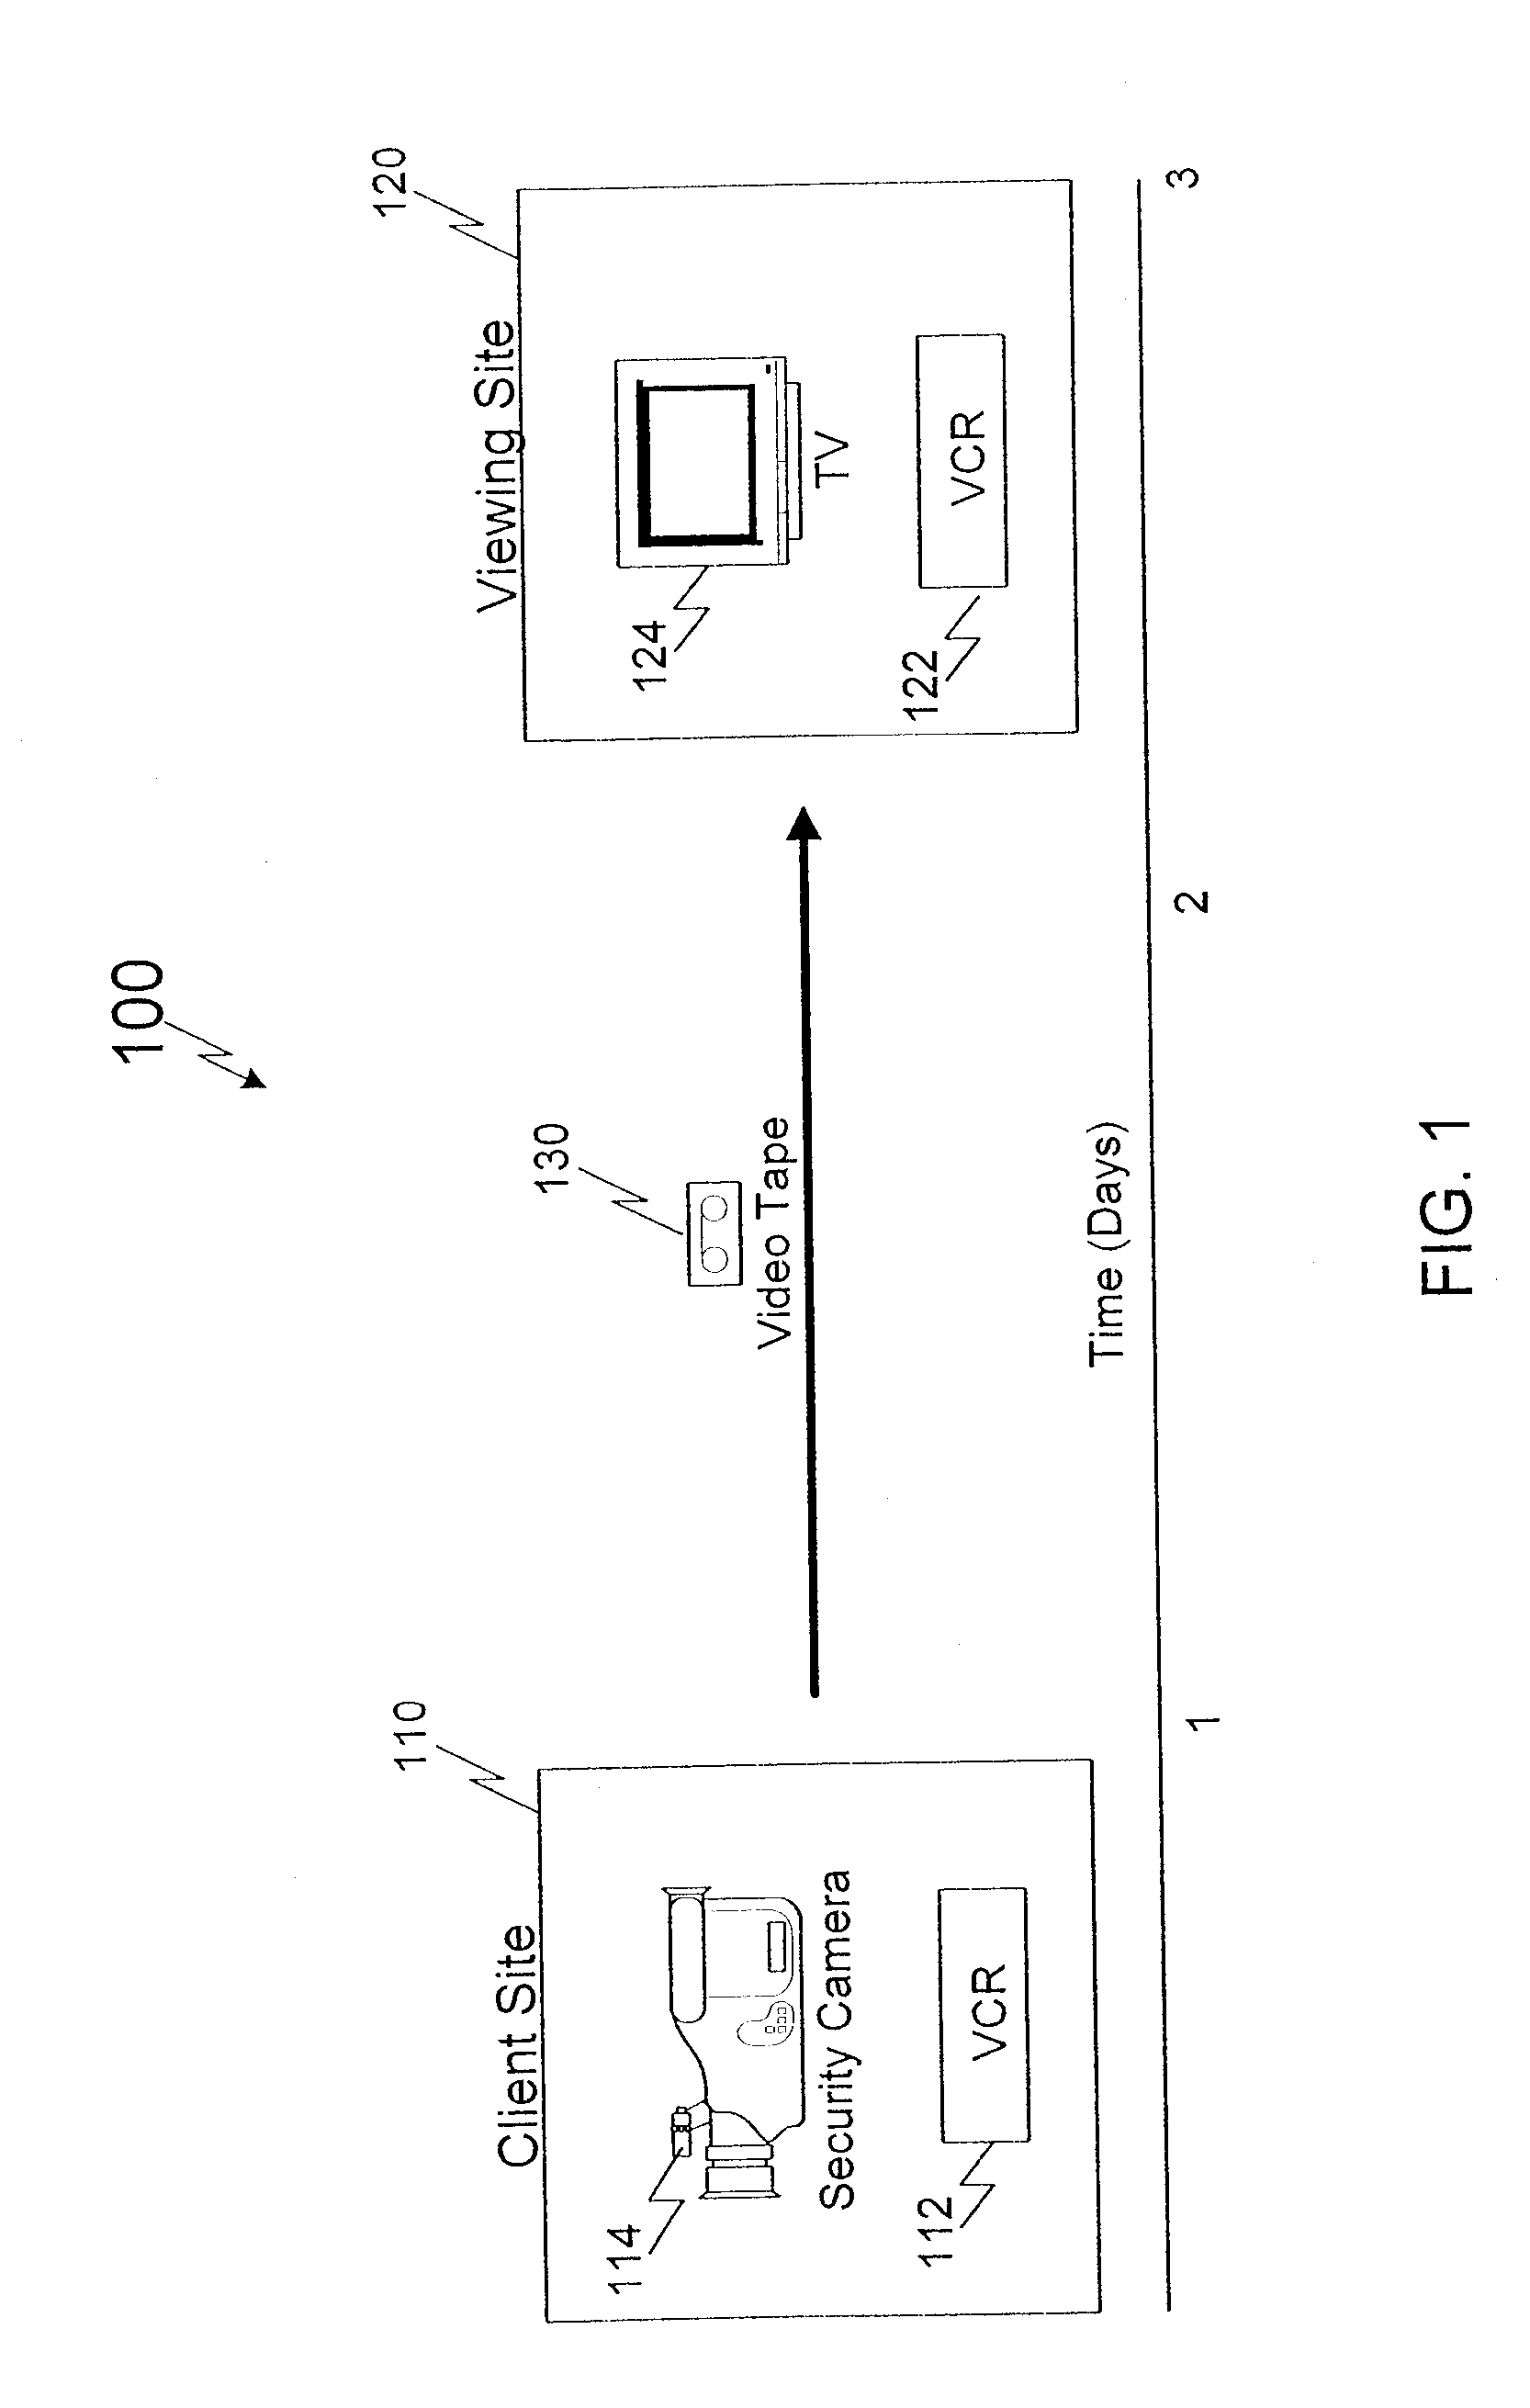 System and method for storing and remotely retrieving surveillance video images